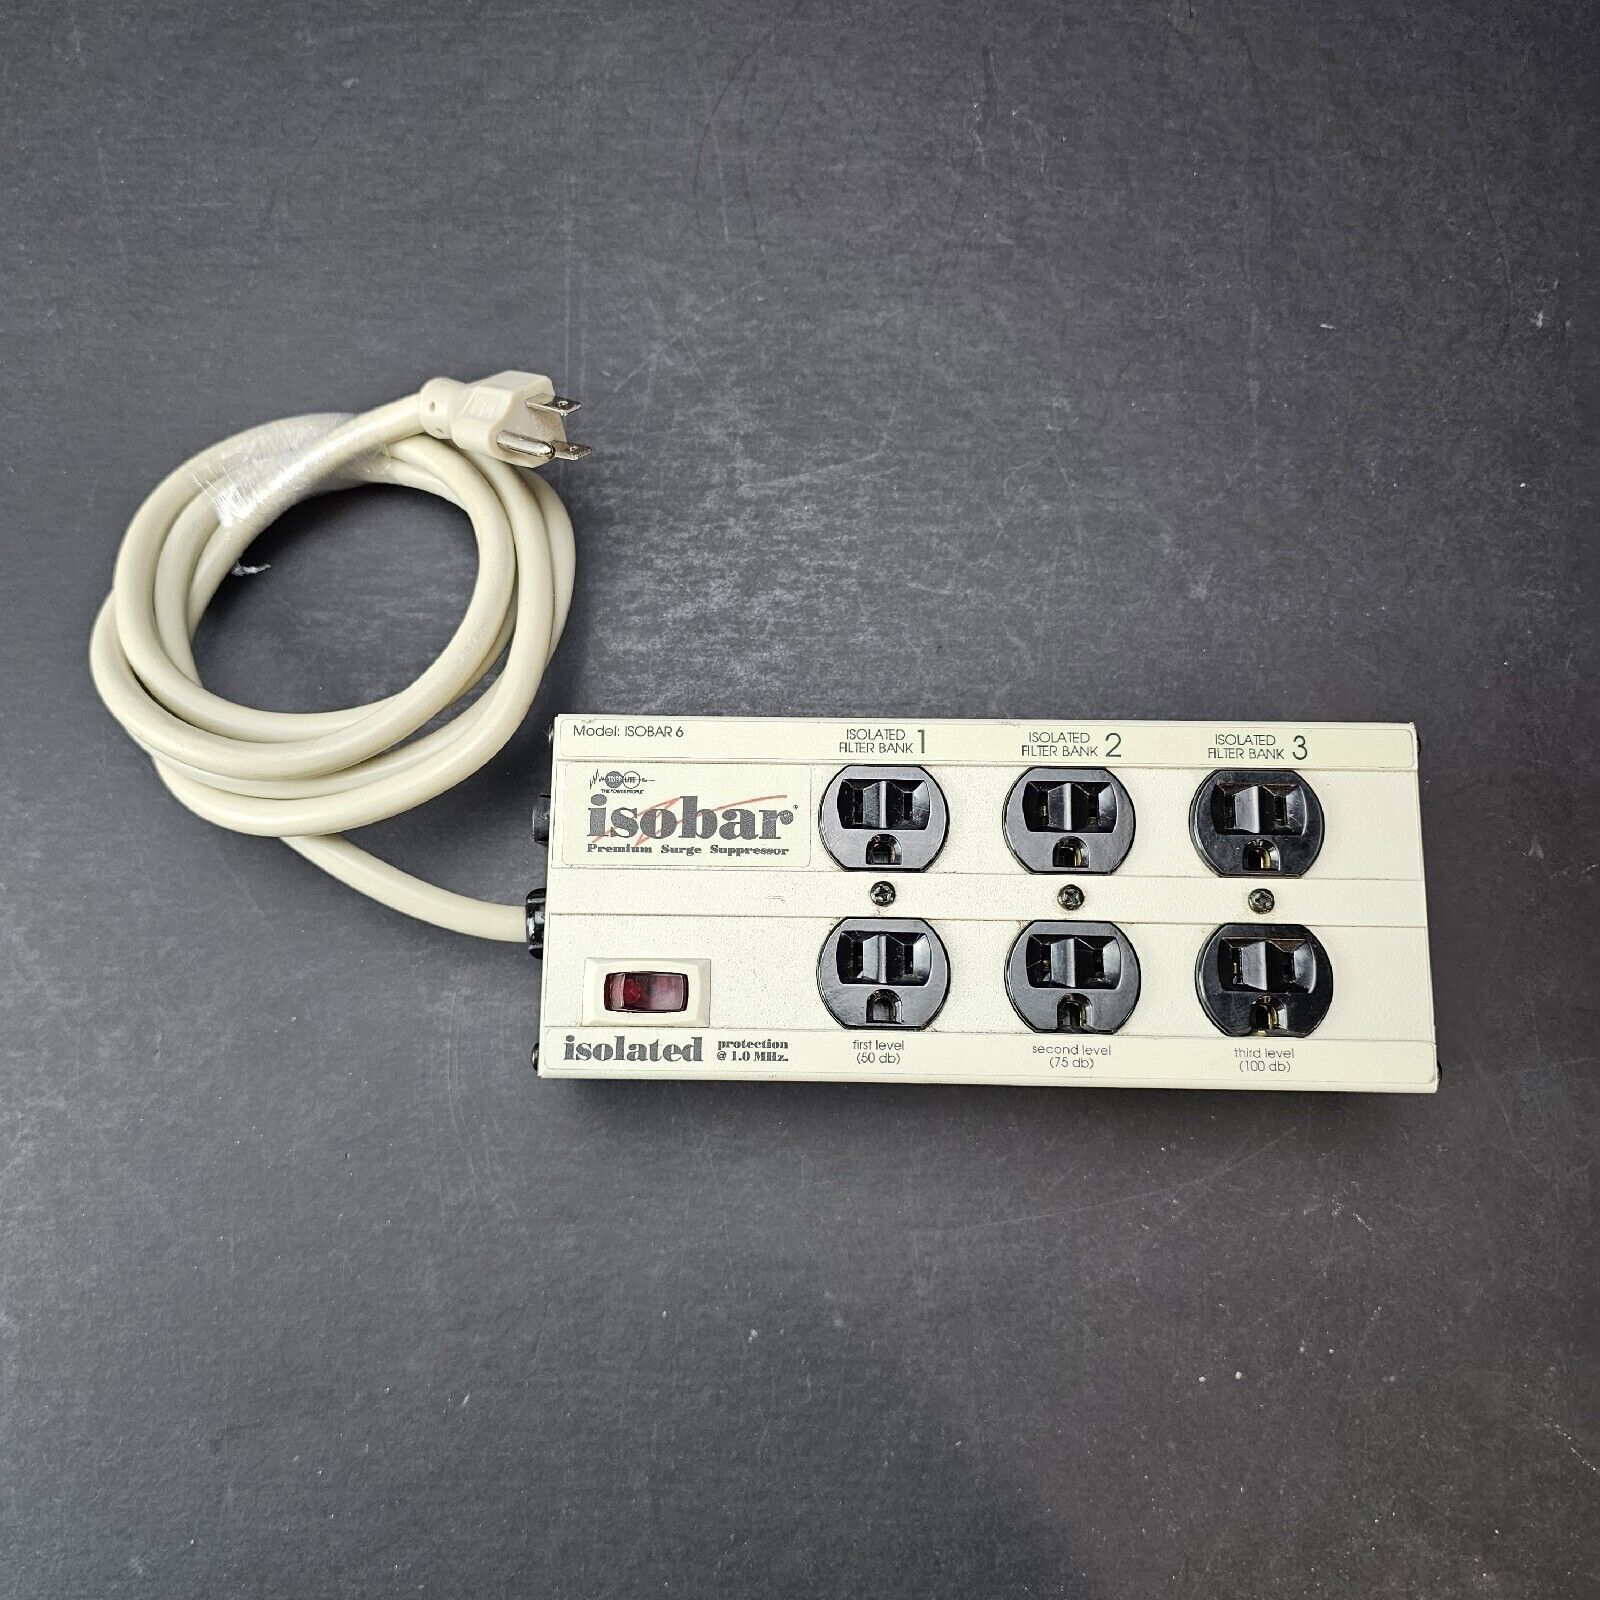 Isobar 6 Premium Surge Protector 6-Outlet 6ft Cord Tested And Passed - Used